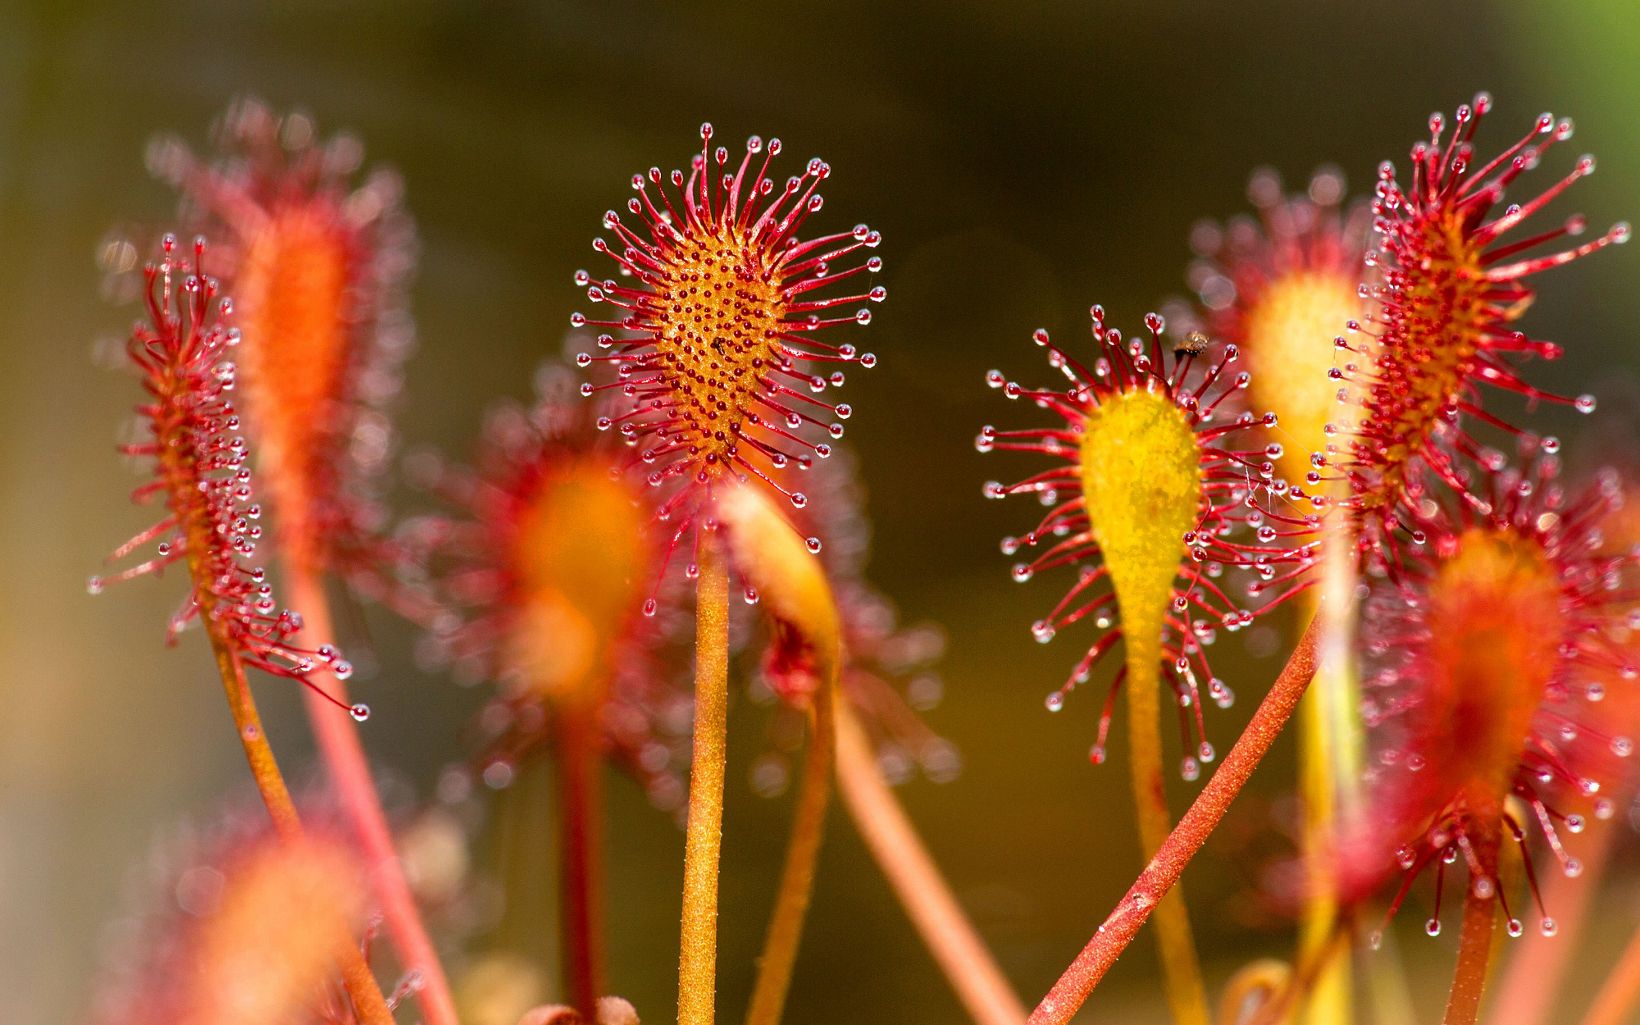 Closeup of sundews. Greenish-yellow stems with a club-shaped structure on the end covered in red spikes, each with a drop of sticky liquid at the end.